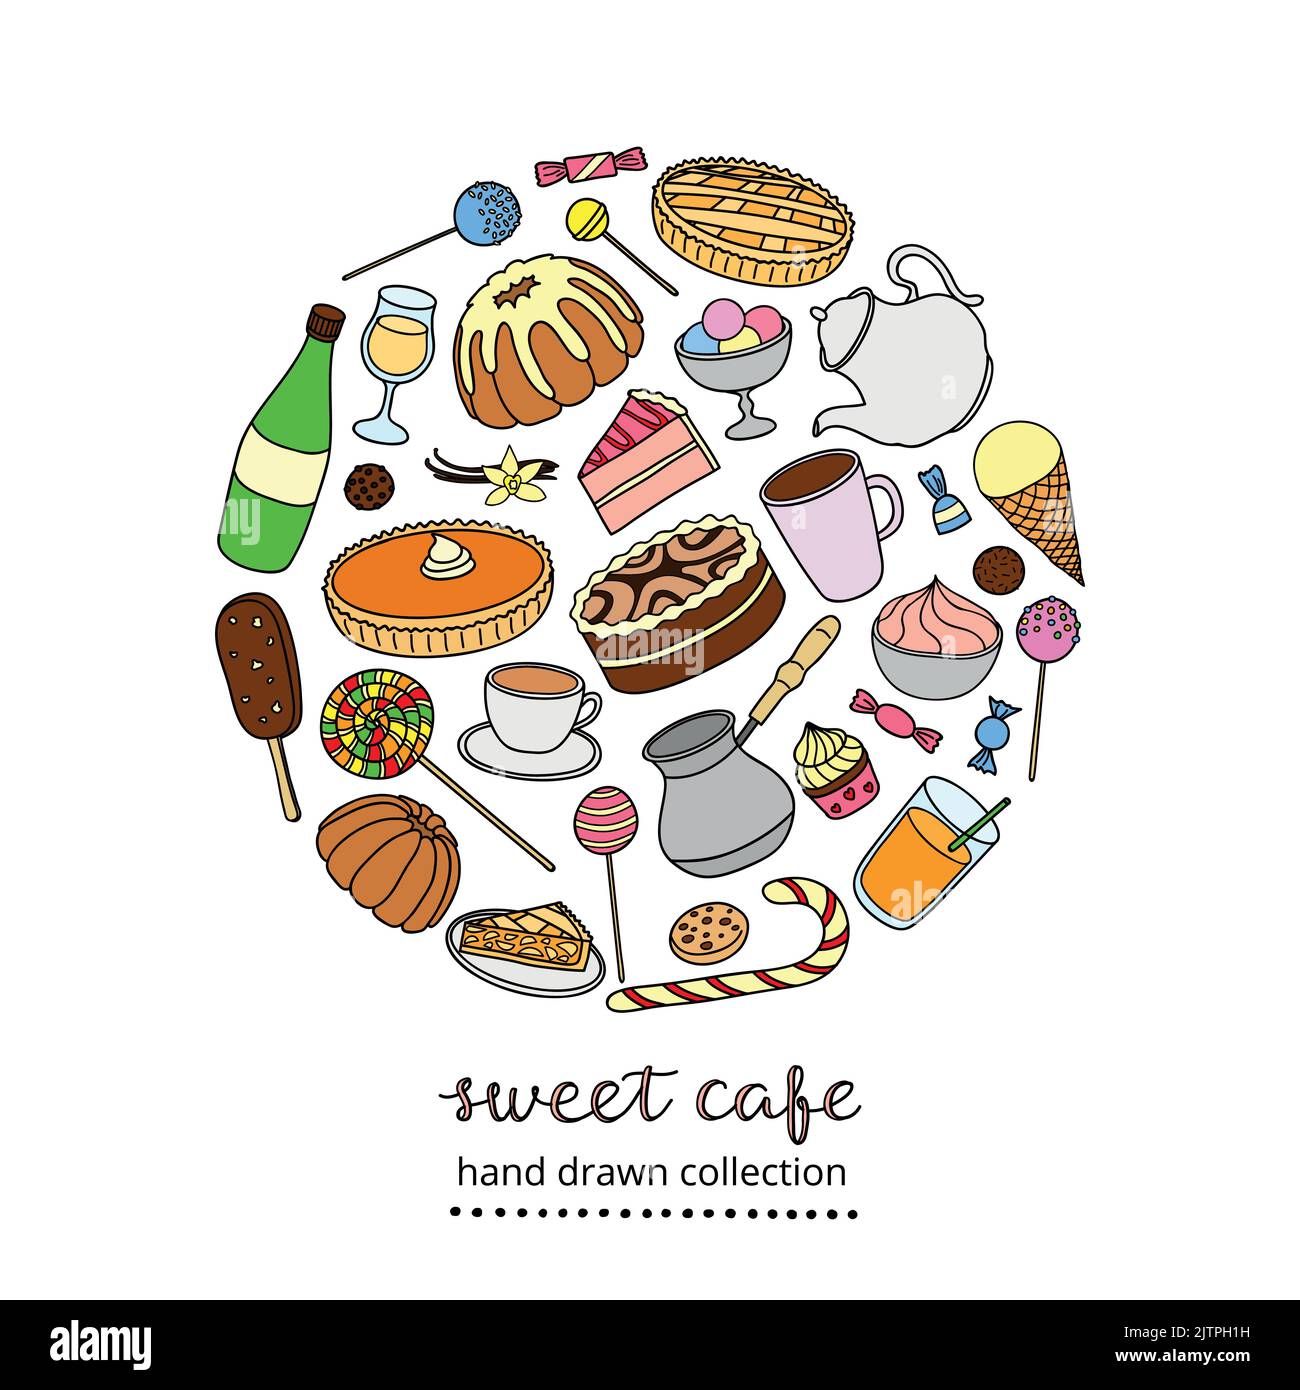 Hand drawn sweets, cakes, ice cream, pies, coffee, tea composed in circle shape with lettering. Stock Vector